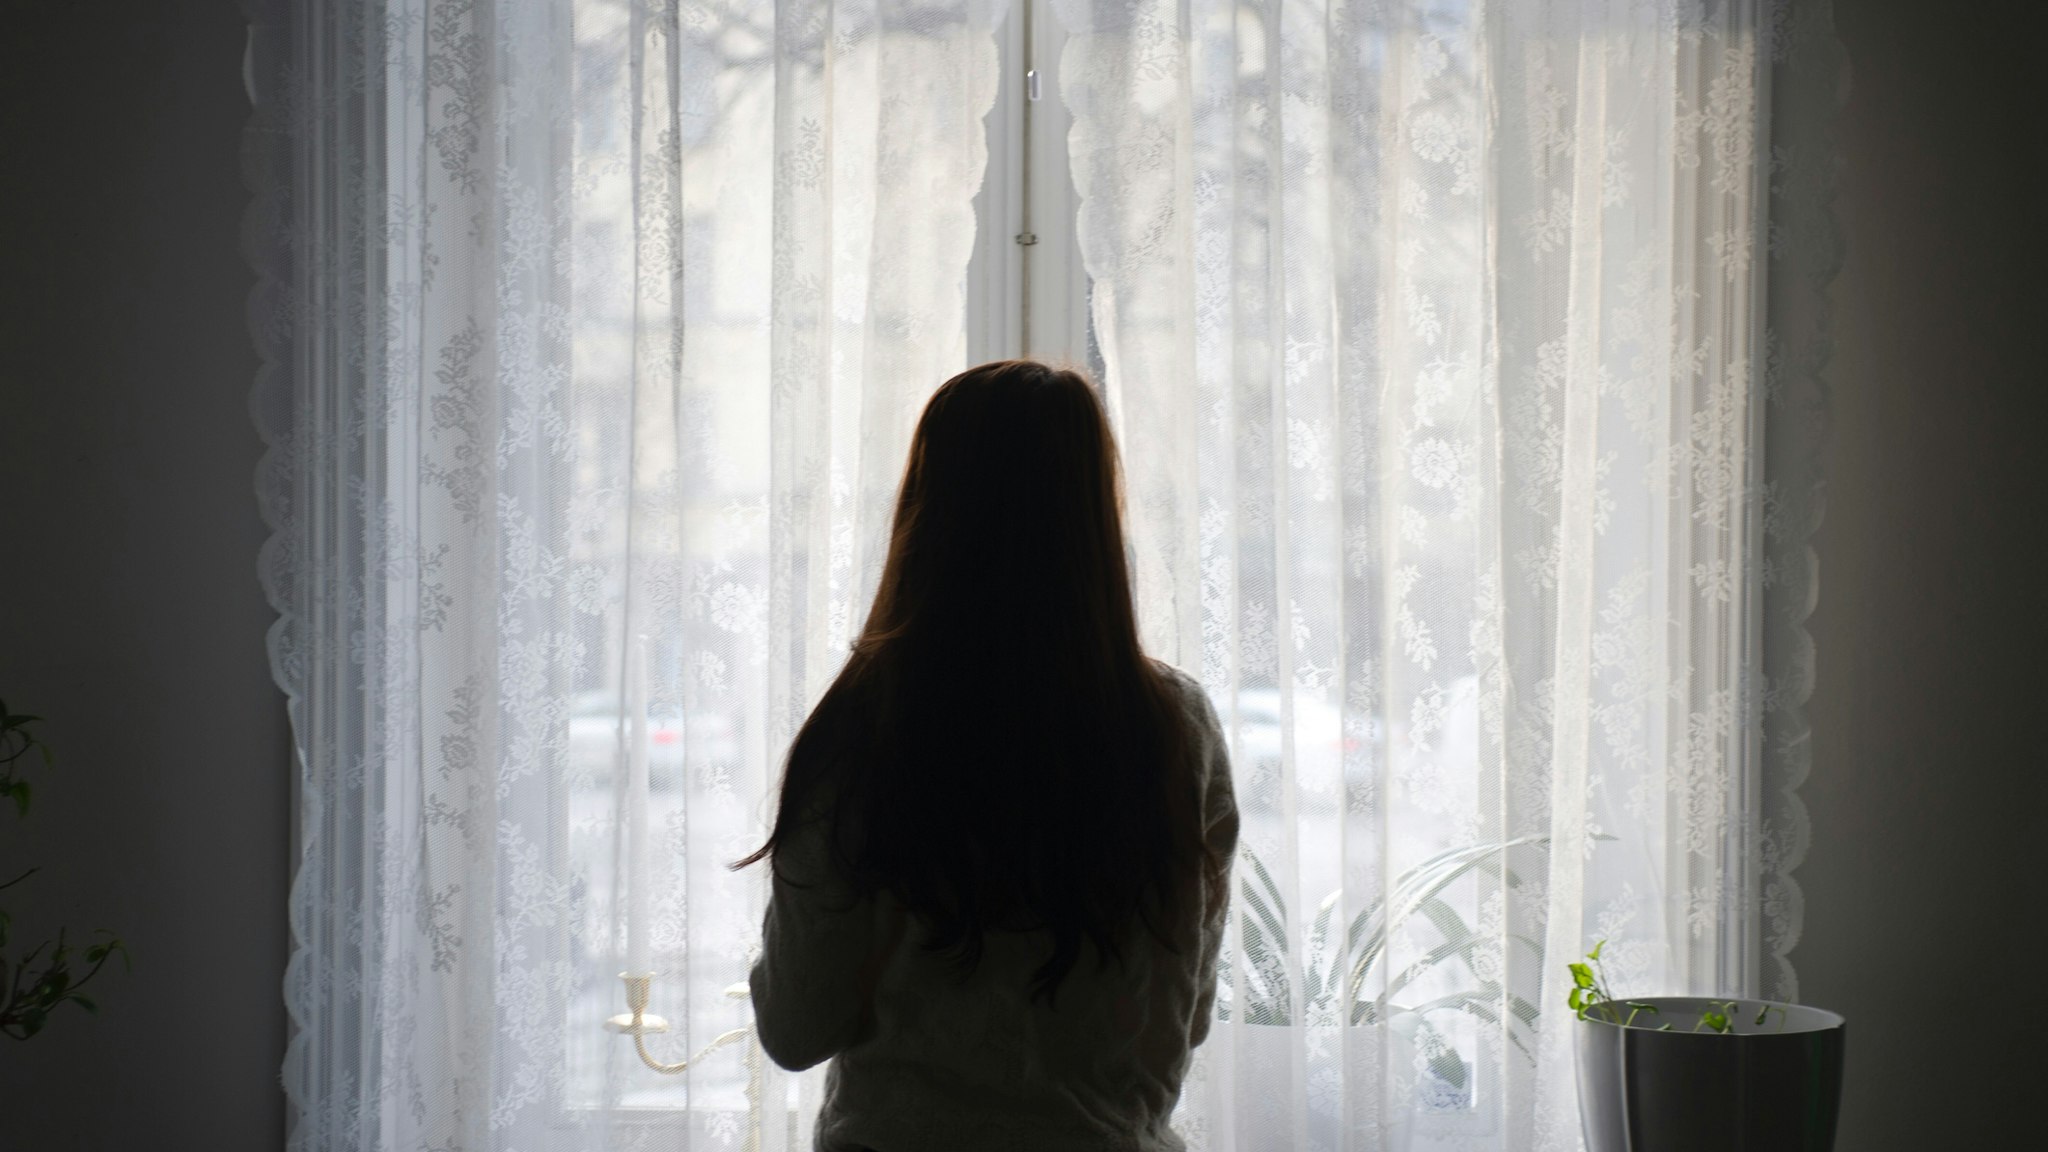 Rear View Of Woman Looking Through Window While Standing At Home - stock photo